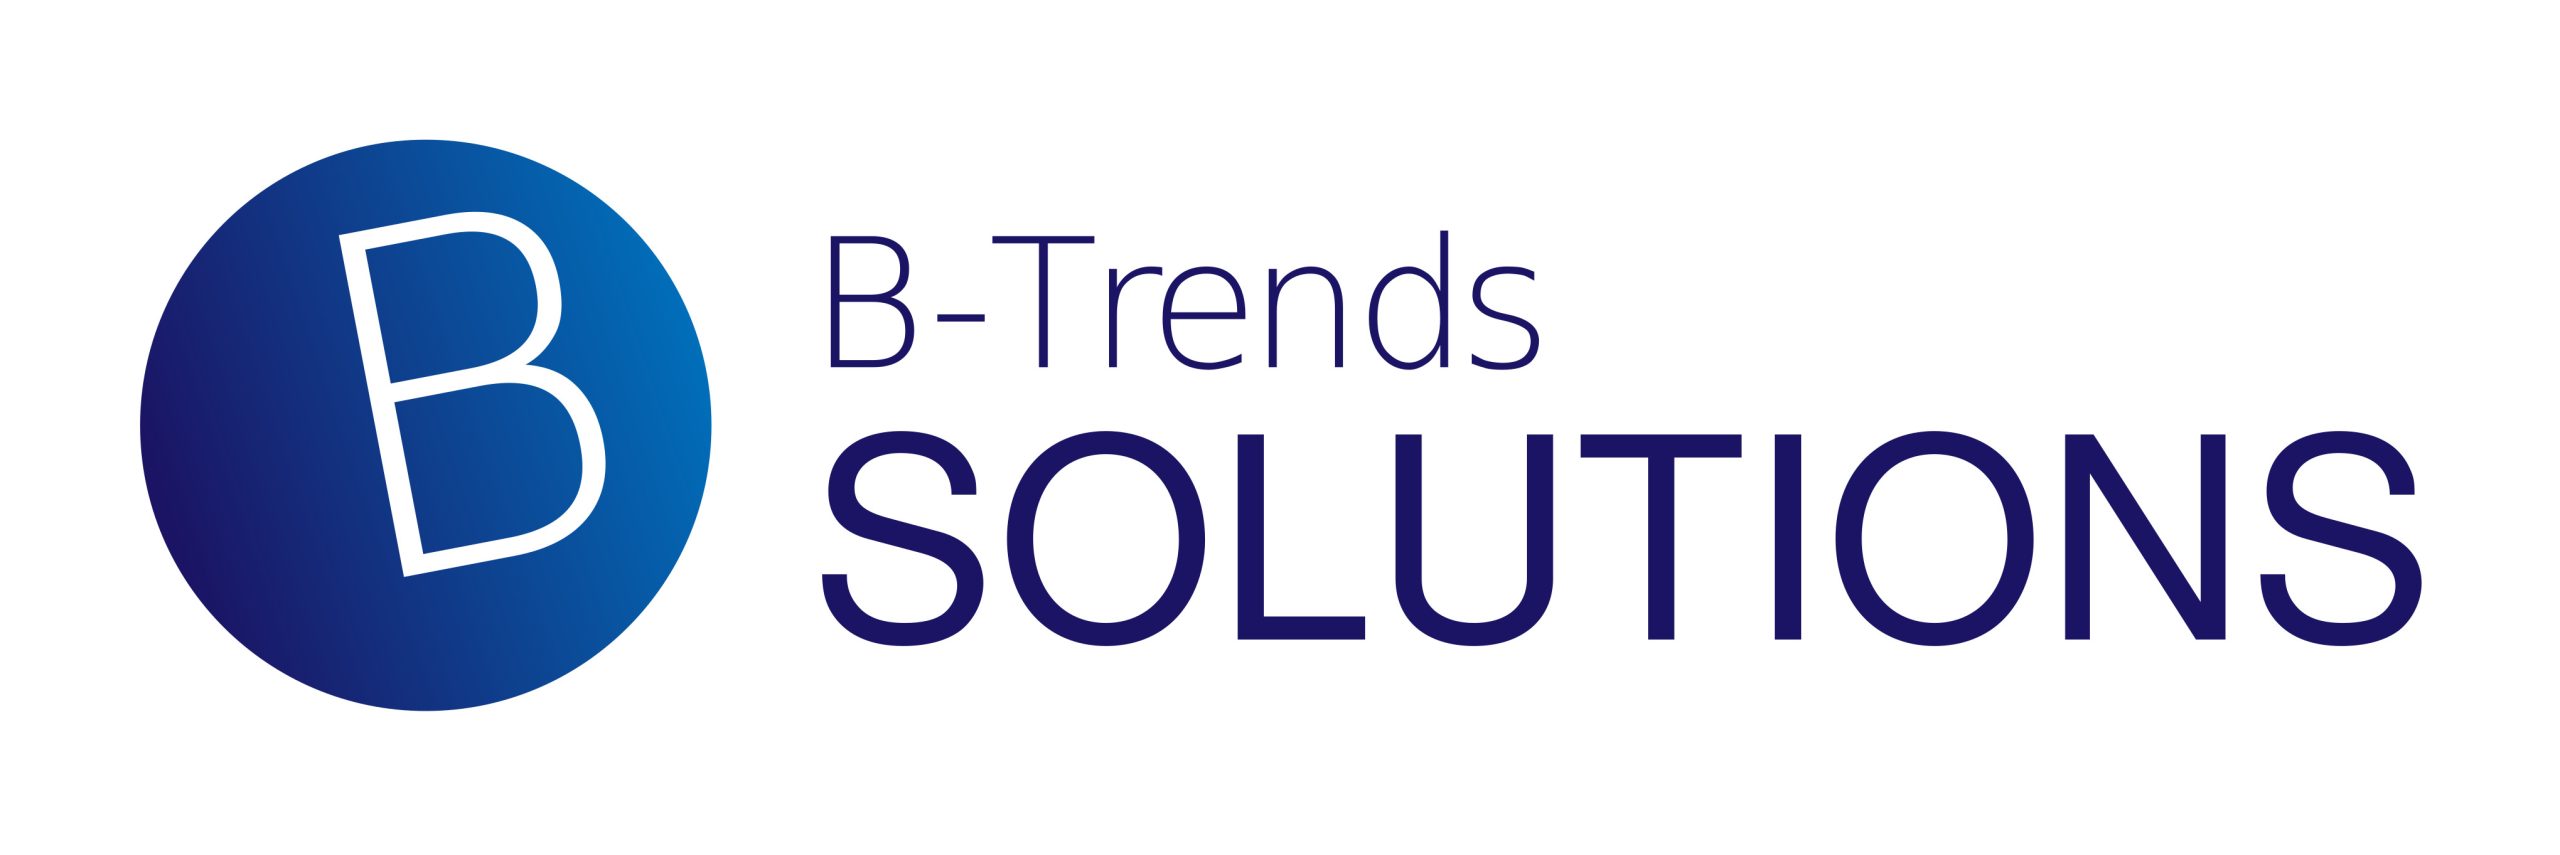 Btrends Solutions